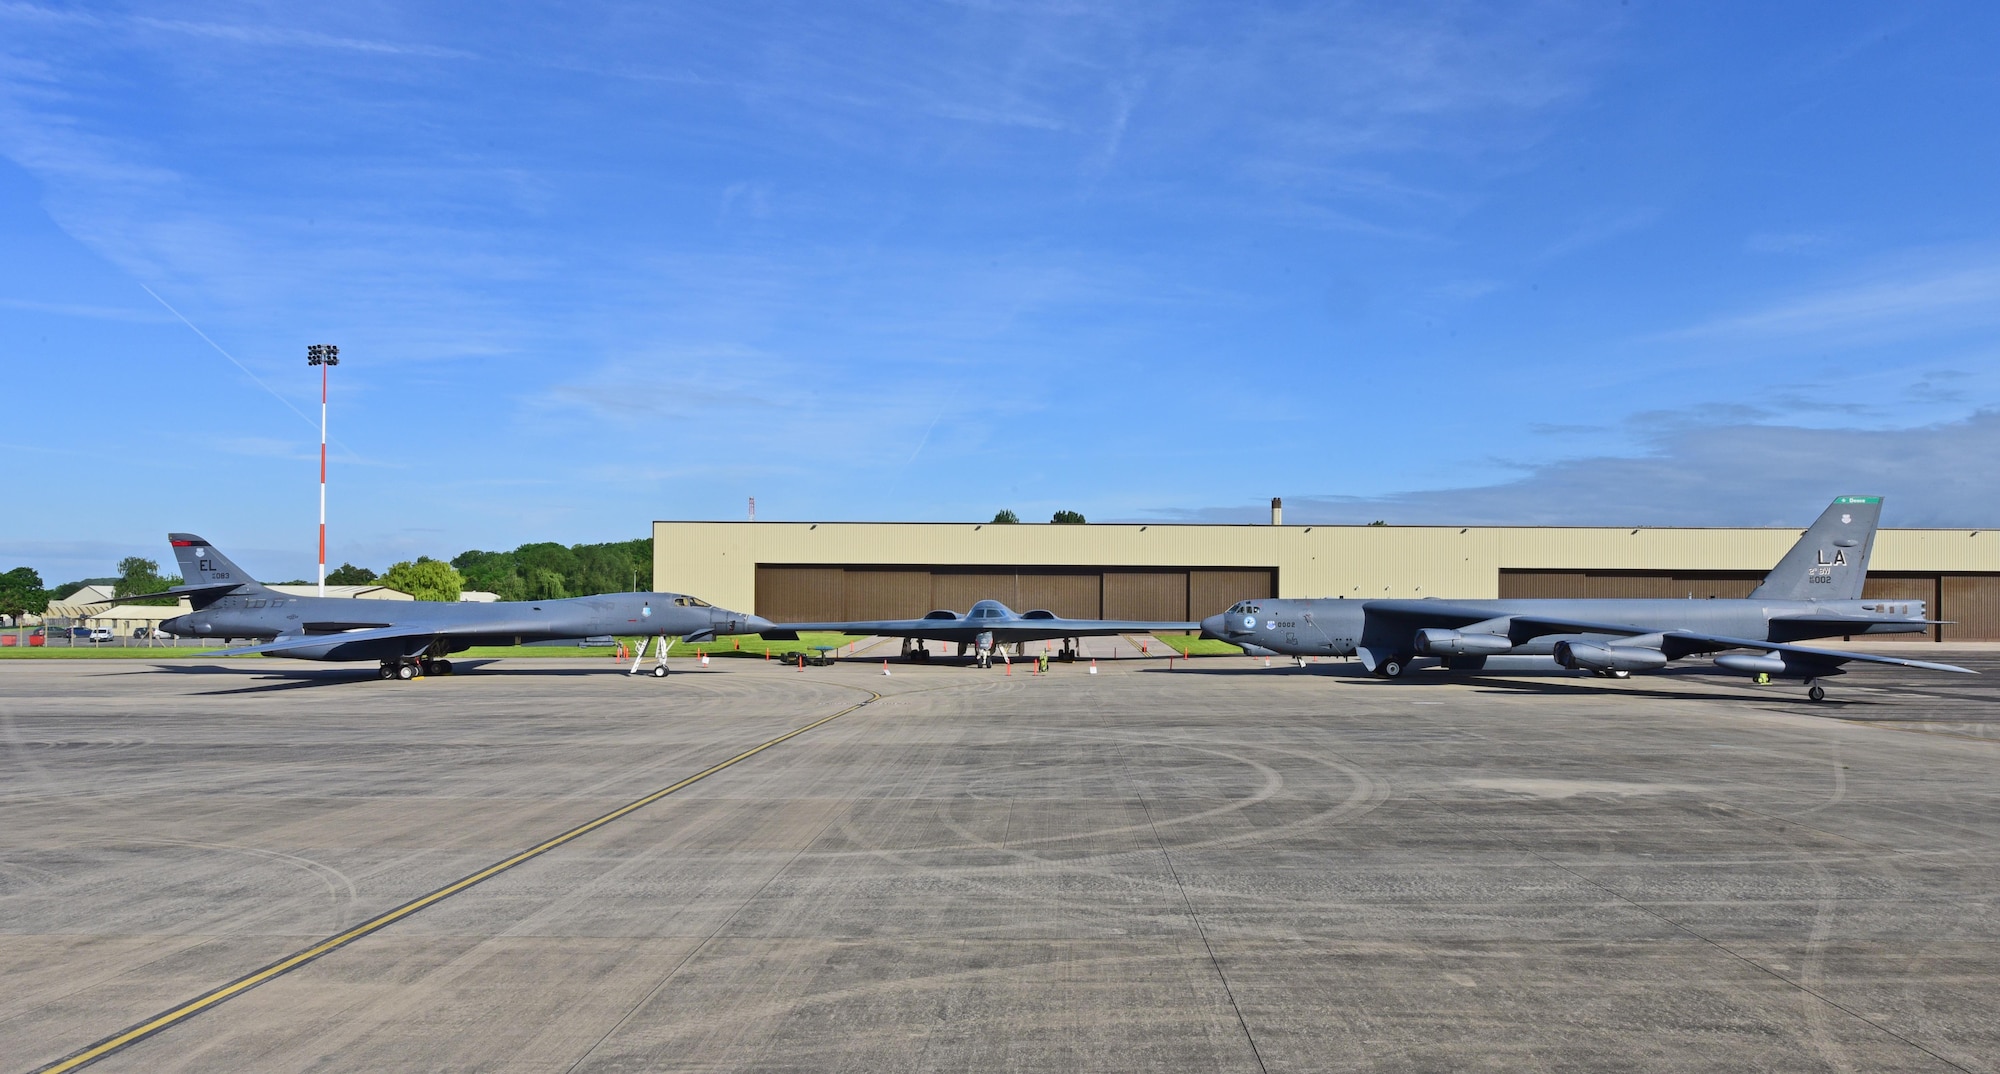 A B-1B Lancer, B-2 Spirit and B-52 Stratofortress are parked on the ramp at Royal Air Force Fairford, U.K., June 12, 2017. This marks the first time in history that all three of Air Force Global Strike Command’s strategic bomber aircraft are simultaneously in the European Theatre, demonstrating the flexible global strike capability. (U.S. Air Force photo by Airman 1st Class Randahl Jenson)